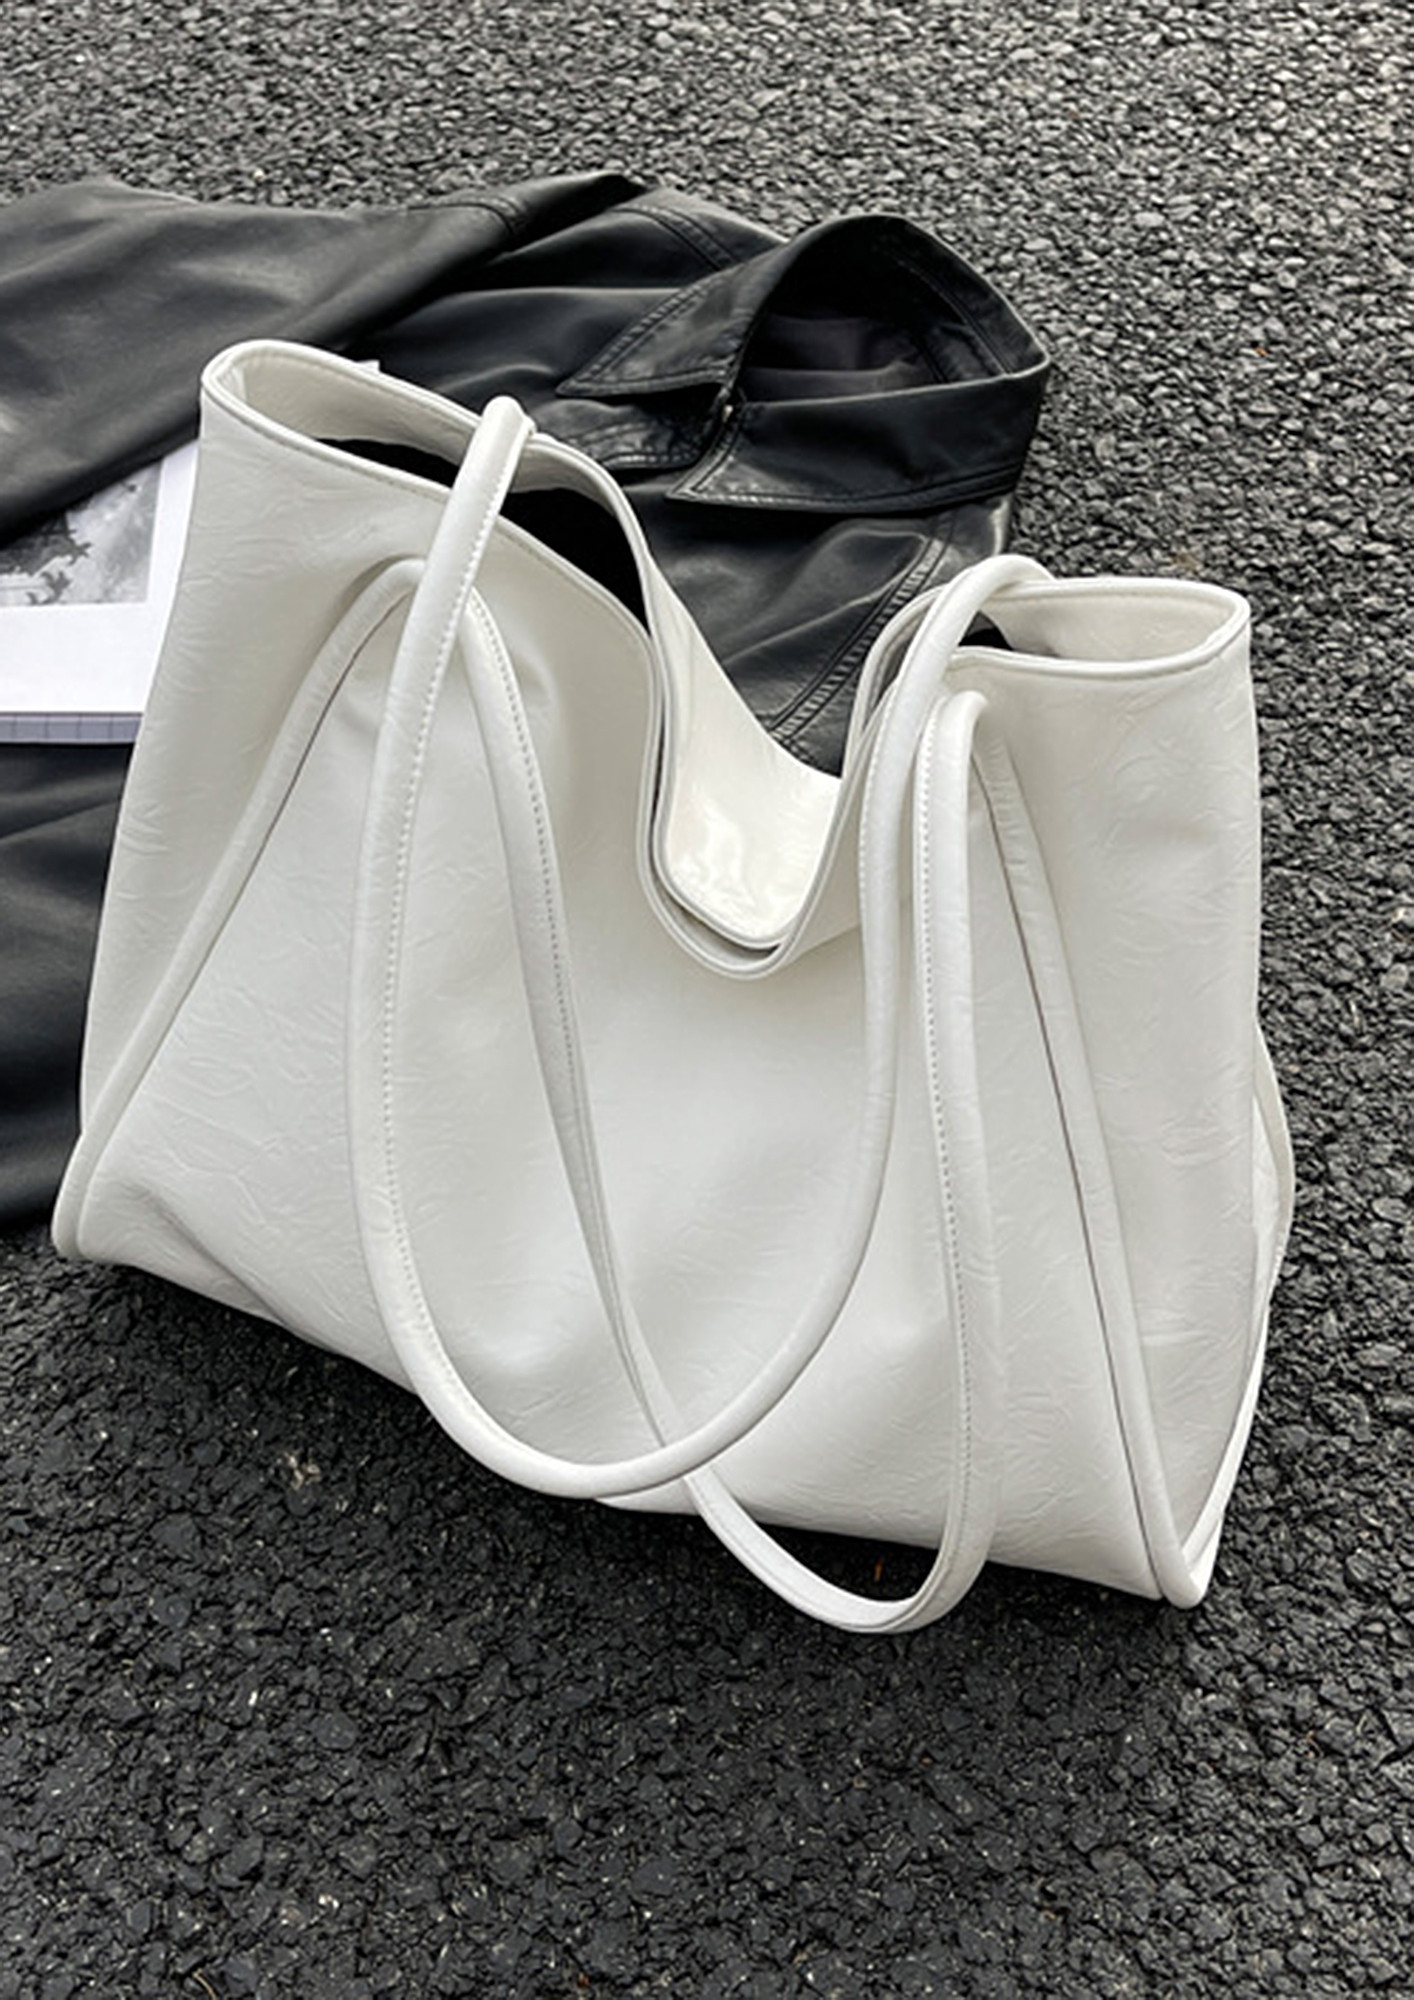 Cotton Plain White Canvas Tote Bag, Upto 5 Kgs, Size/Dimension: 35 X 41 X  13 Cm at Rs 95/piece in Howrah